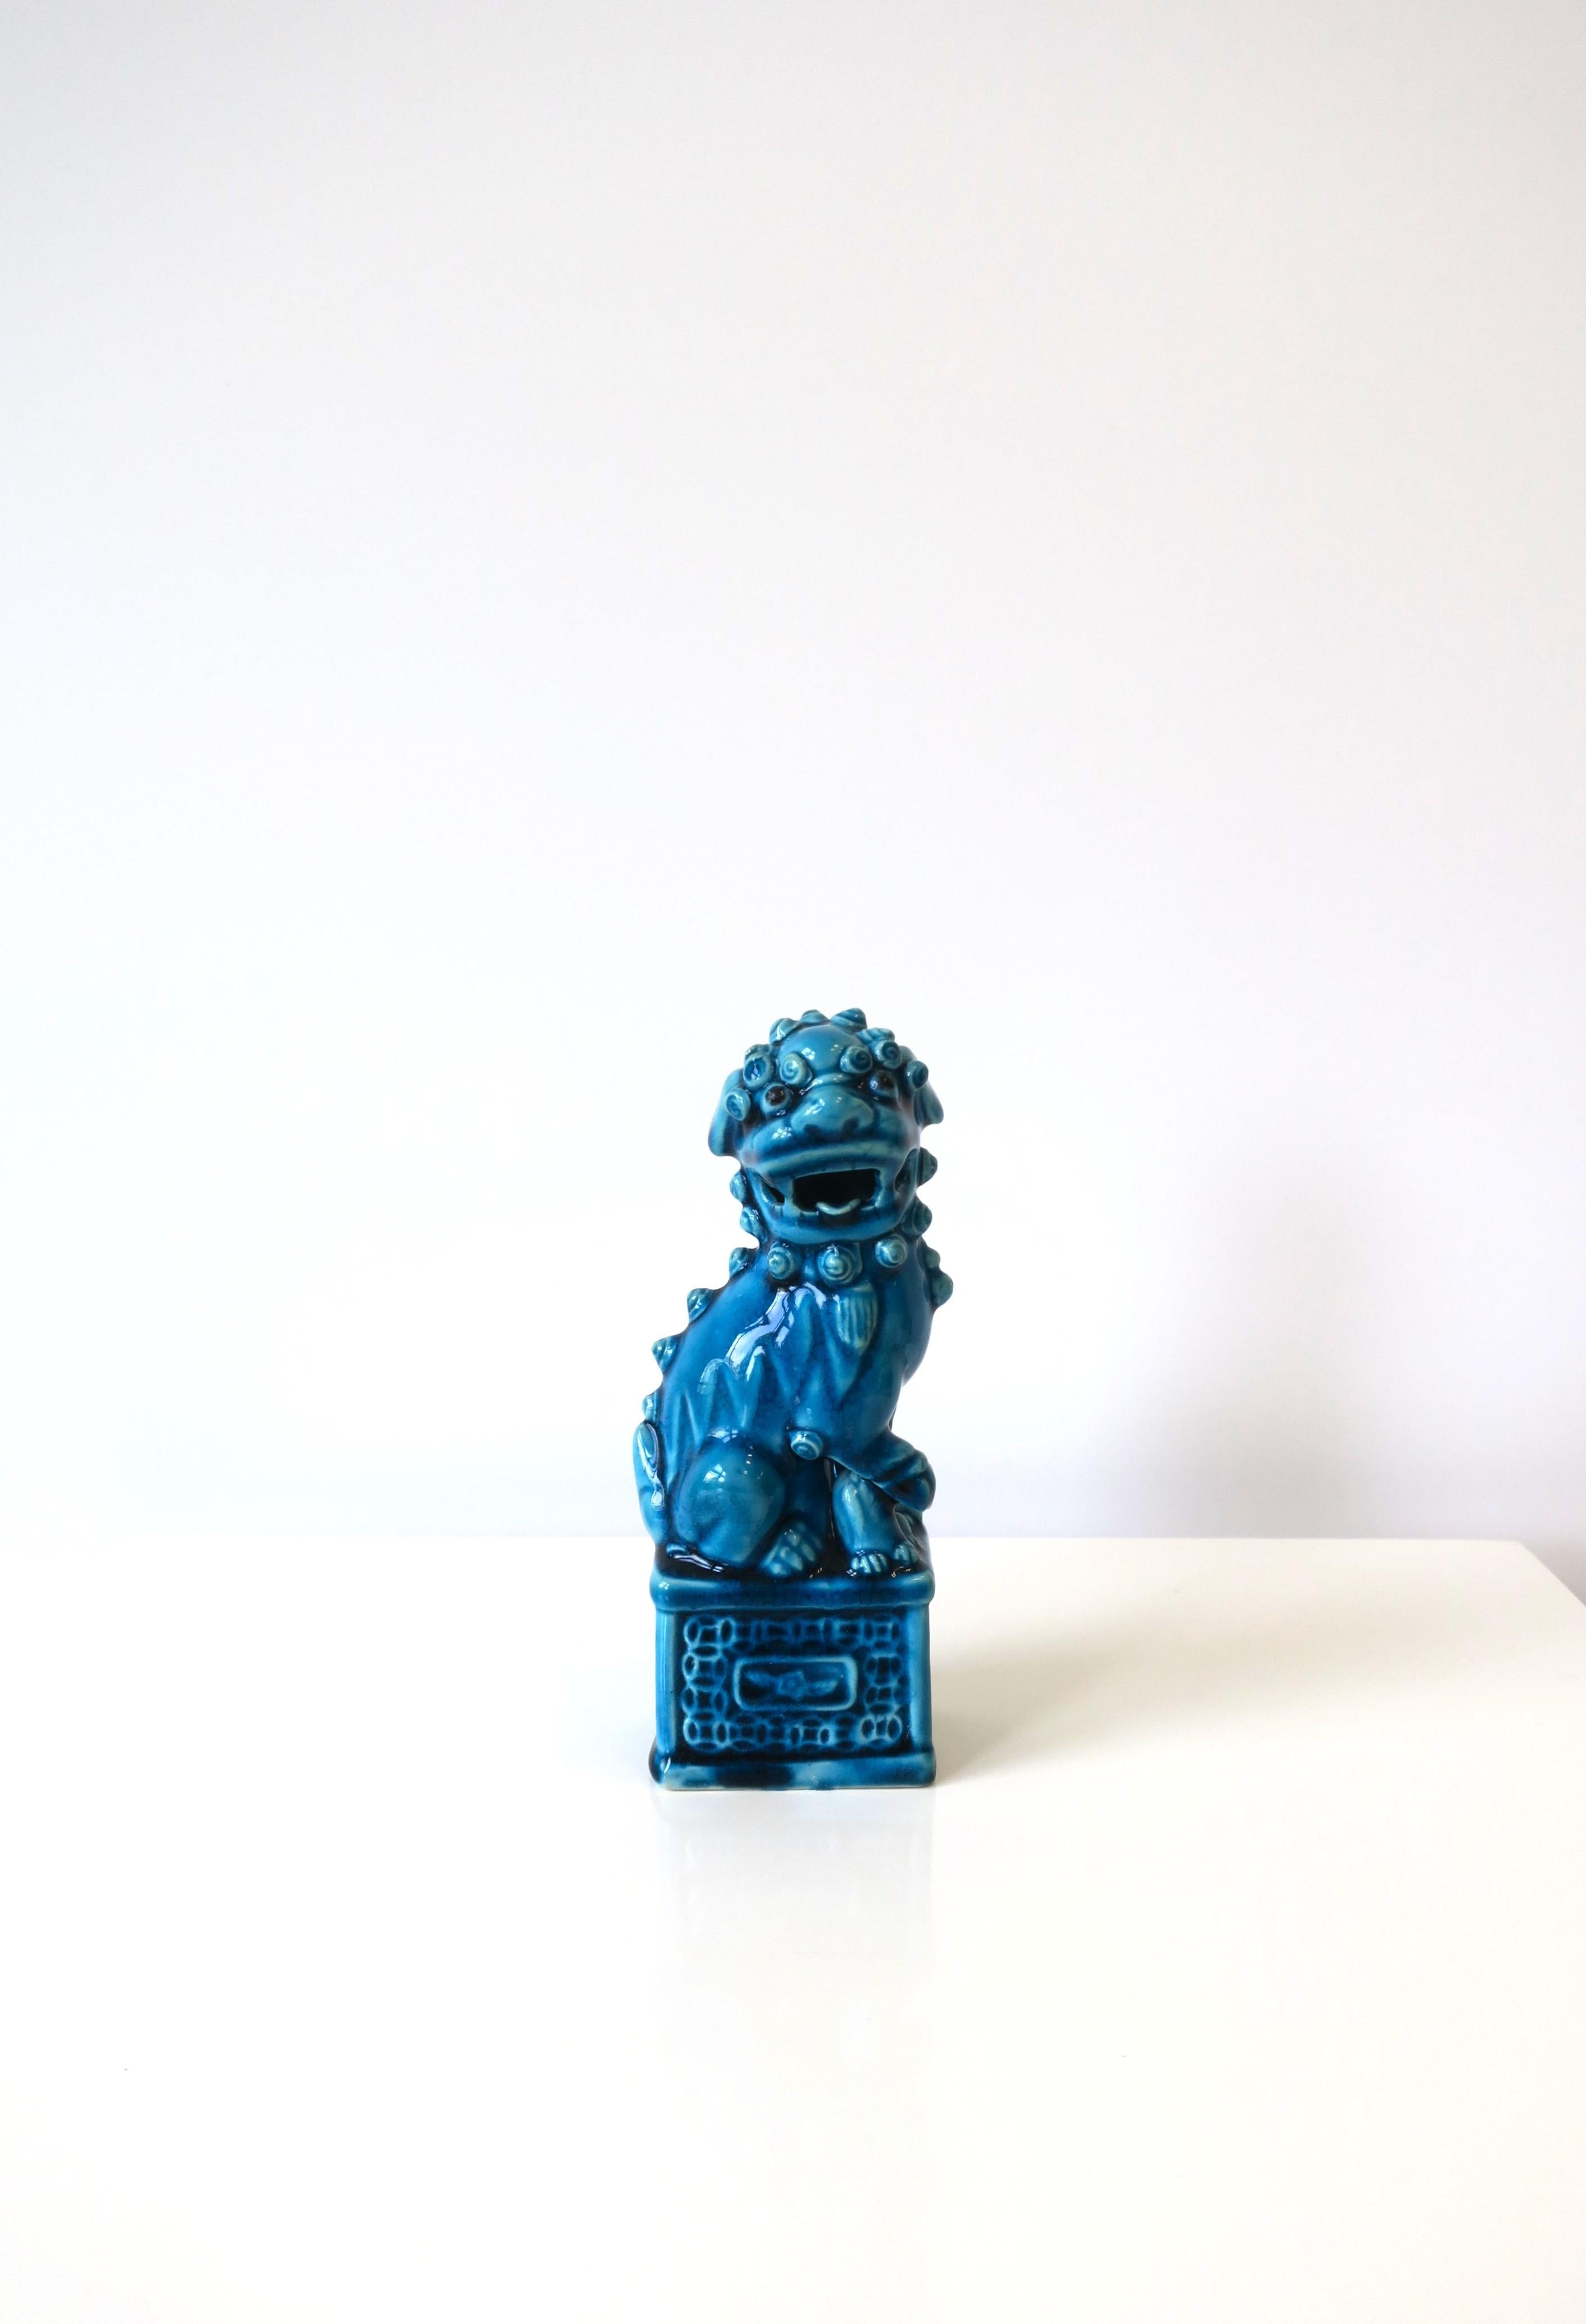 A single Lion Foo dog ceramic decorative object, circa mid-20th century, 1960s, China. This Lion Foo Dog is a deep striking turquoise blue and makes a great decorative object for a desk, shelf, library, cocktail table, etc. 

Dimensions: 6.38